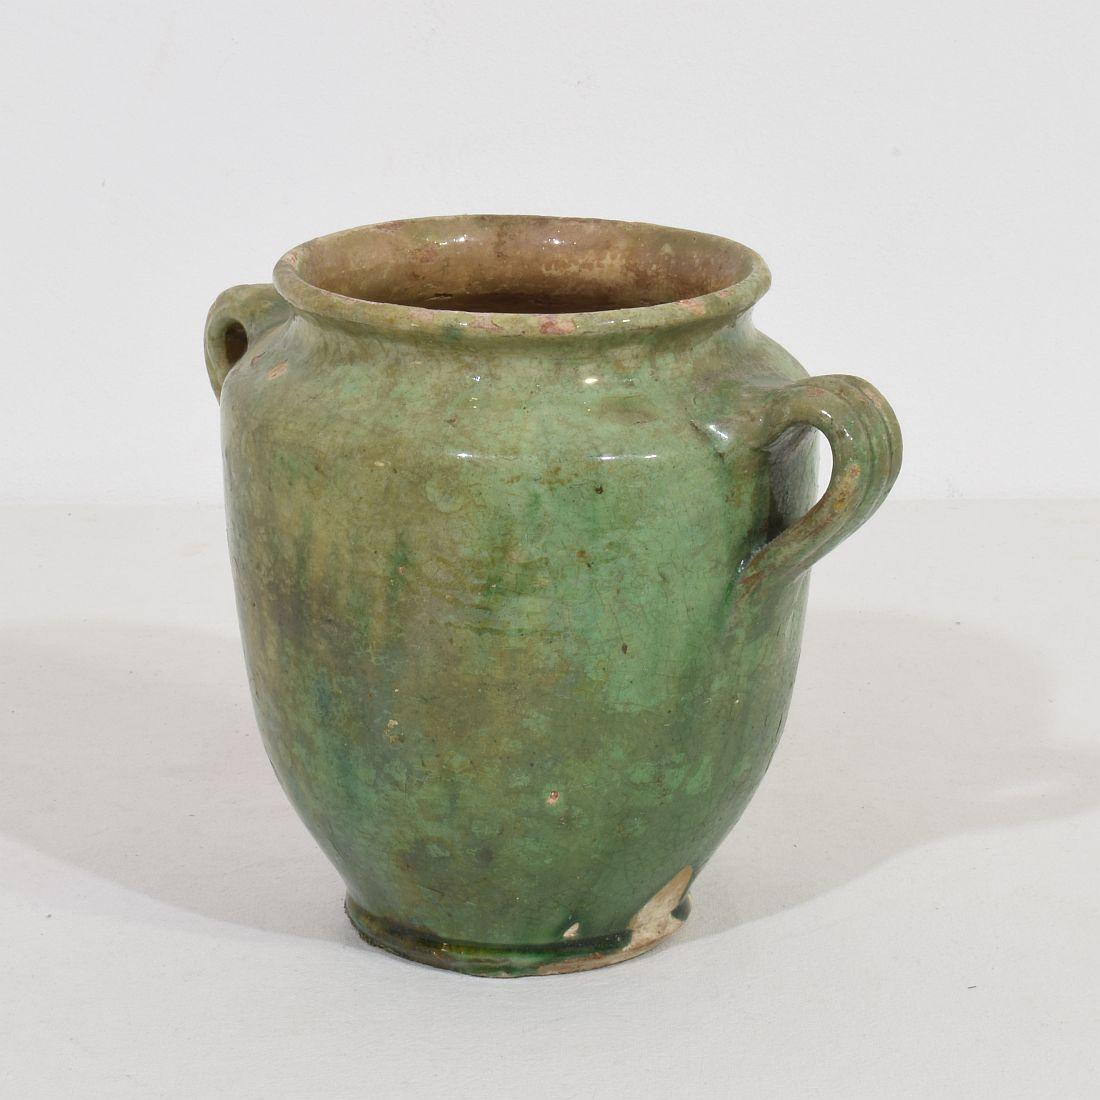 Beautiful confit jar with very rare faded green glaze. 
Confit jars were used primarily in the South of France for the preservation of meats such as duck or goose for dishes such as cassoulet or foie gras. The bottom halves were left unglazed, due